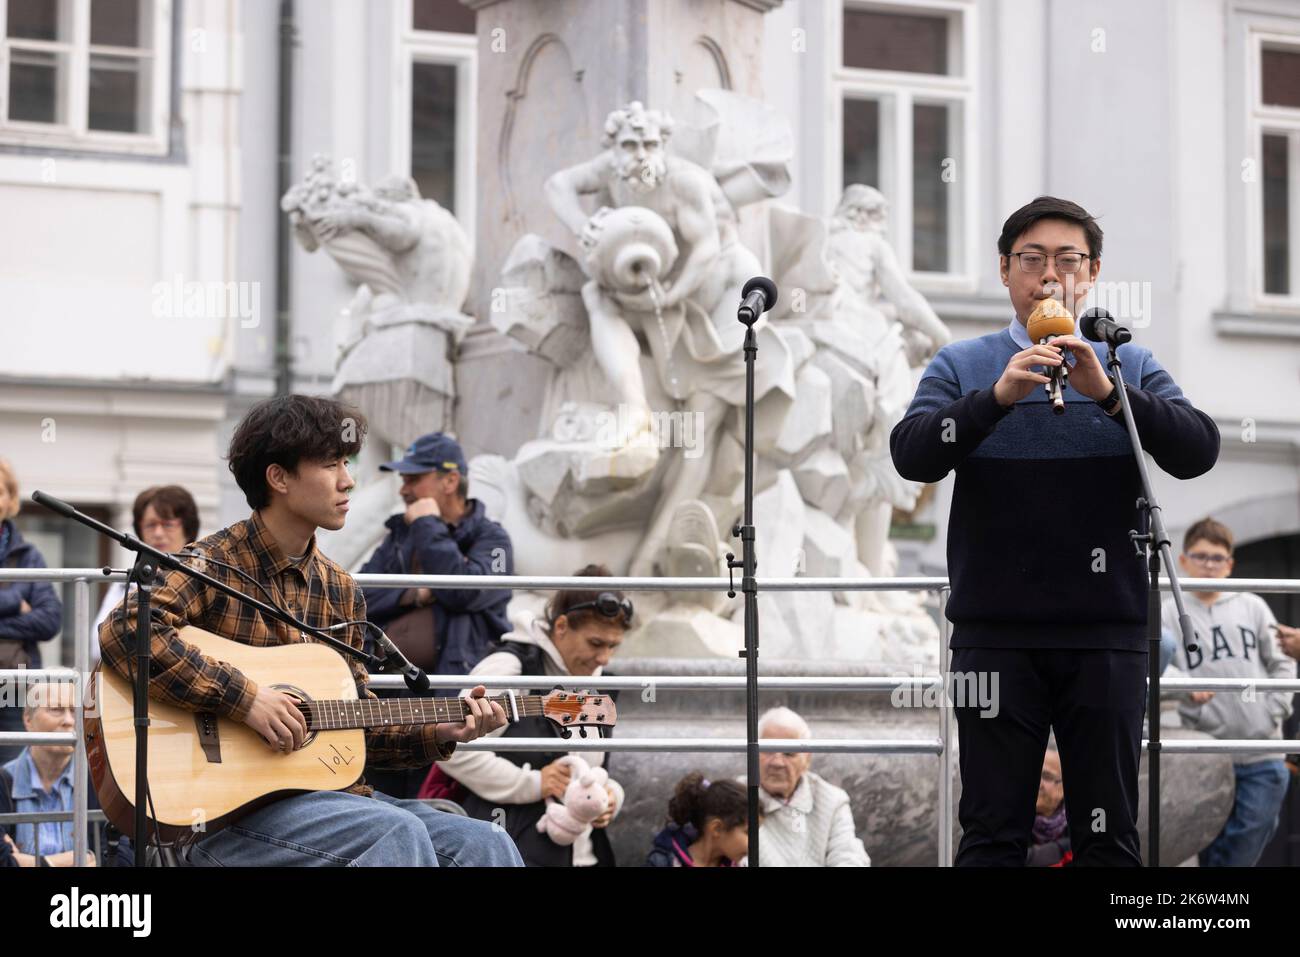 Ljubljana, Slovenia. 15th Oct, 2022. Teachers from the Confucius Institute in Ljubljana perform a cucurbit flute and guitar duet at a charity event in Ljubljana, Slovenia, Oct. 15, 2022. The Confucius Institute in Ljubljana on Saturday showcased Chinese culture at a charity event held in the capital of Slovenia. Visitors had the chance to taste Chinese tea, experience Chinese calligraphy, and put on Hanfu, traditional Chinese clothing, to take photos at the event, which aims at raising fund for Slovenian children in need. Credit: Zeljko Stevanic/Xinhua/Alamy Live News Stock Photo